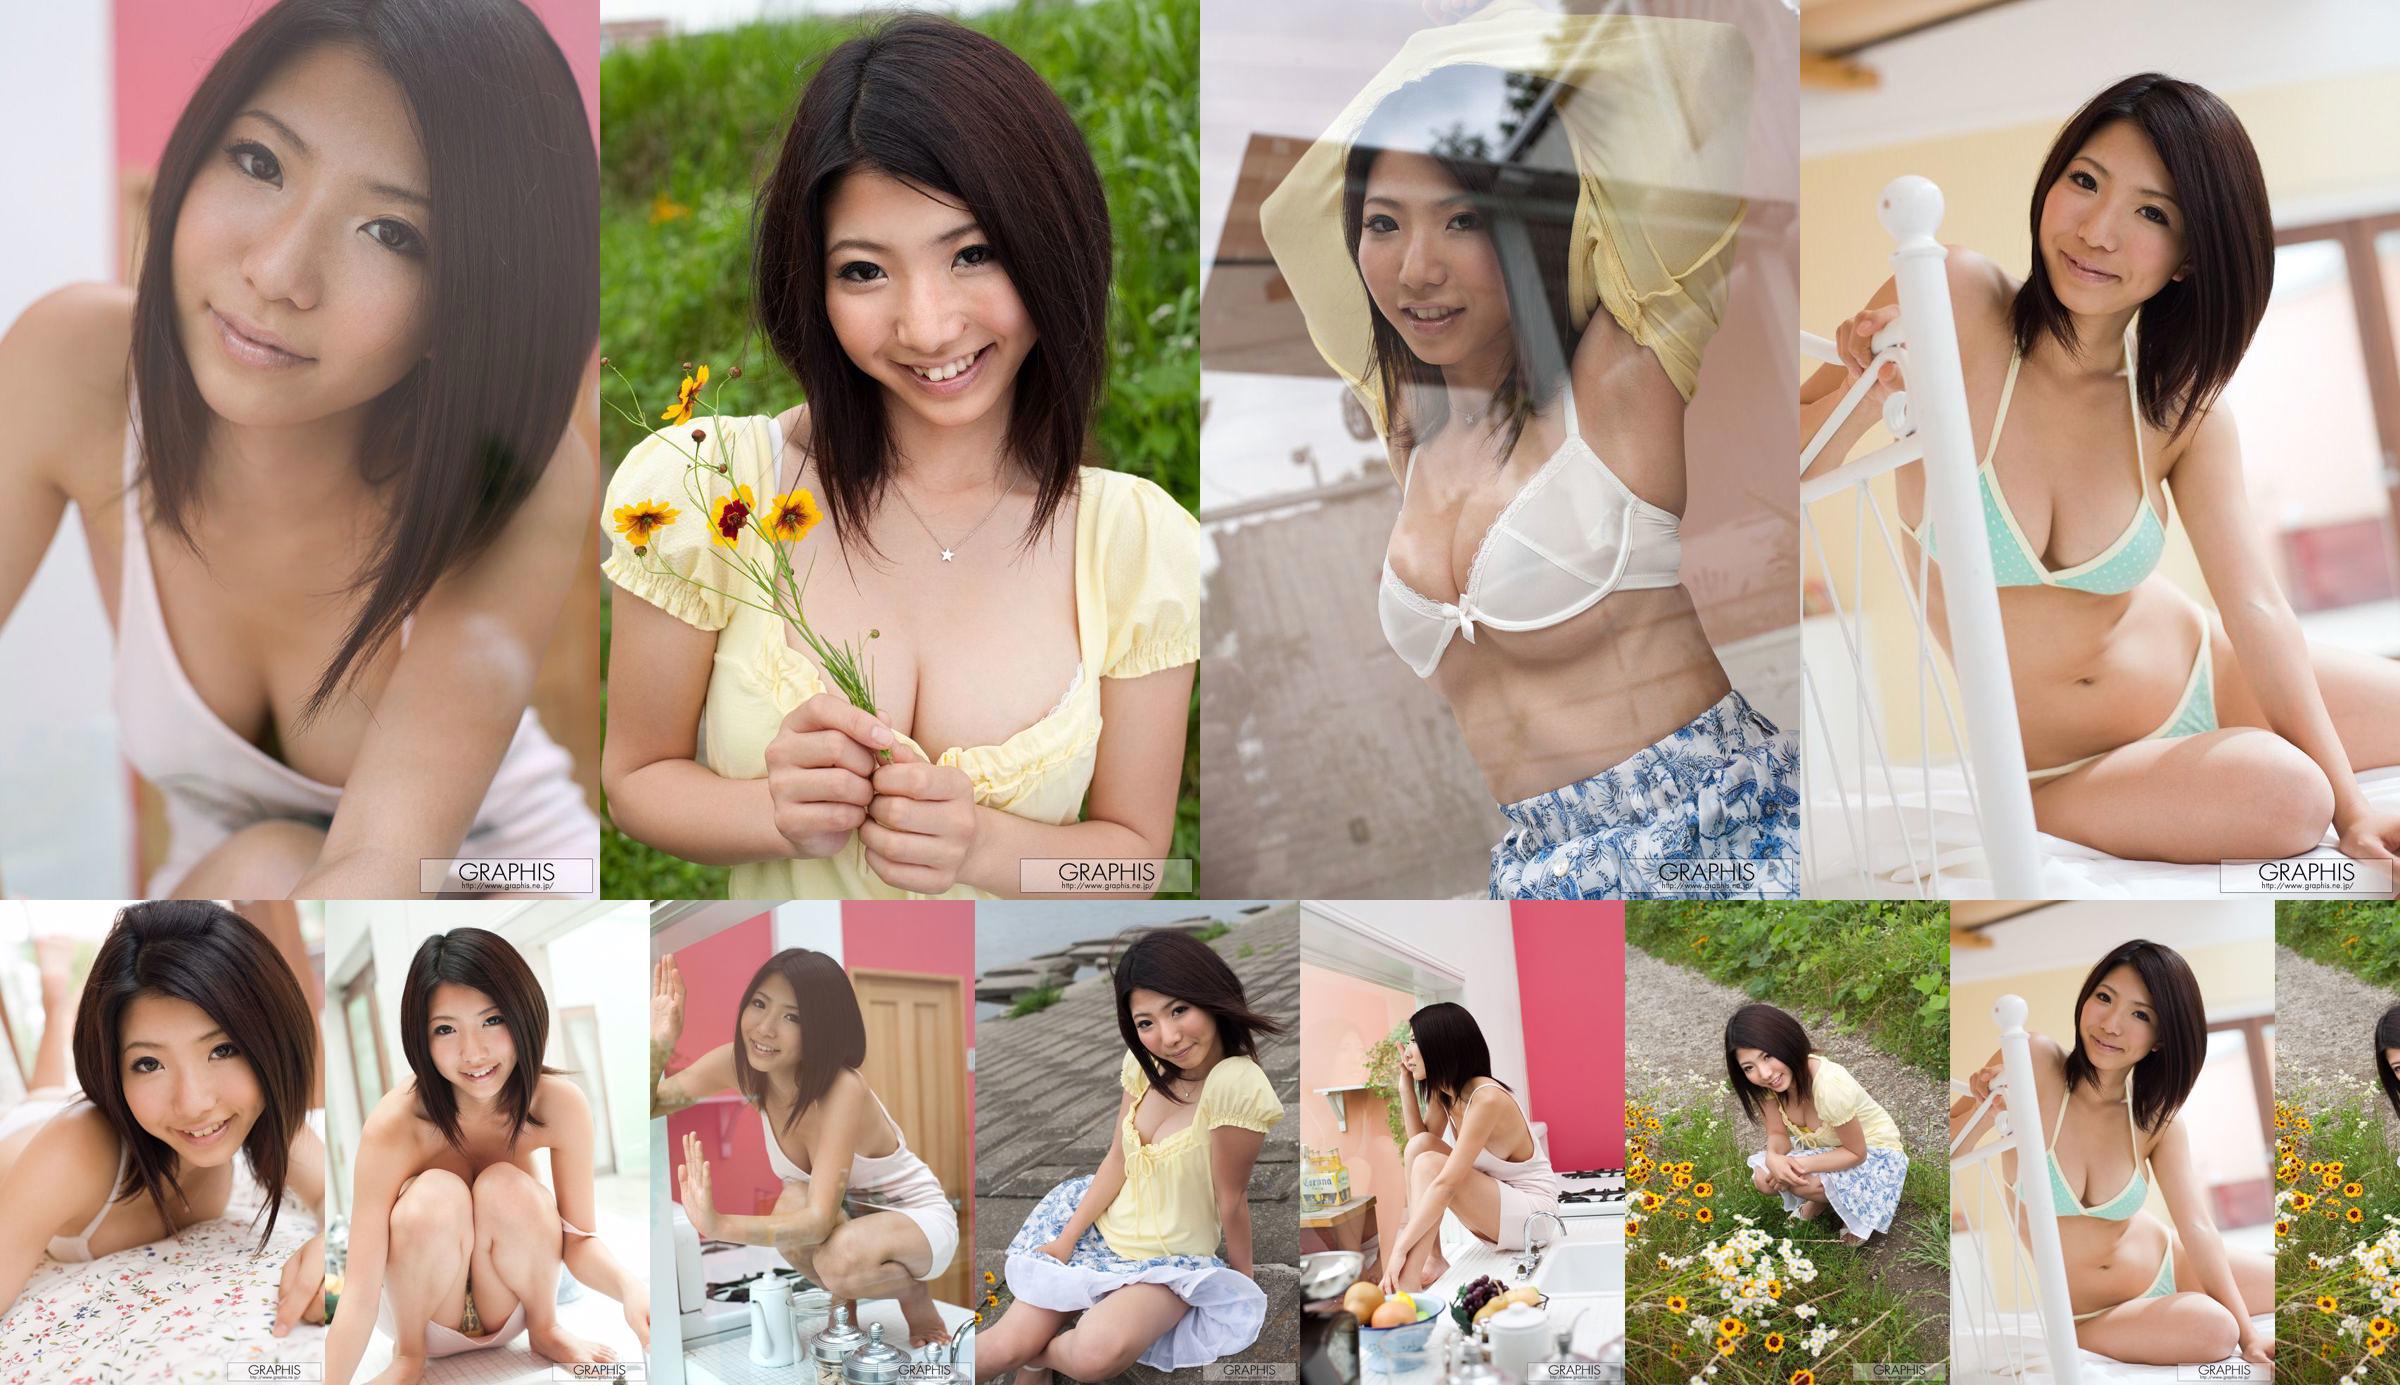 An Ann 《Simple and Innocent》 [Graphis] Gals No.9b283b Seite 1